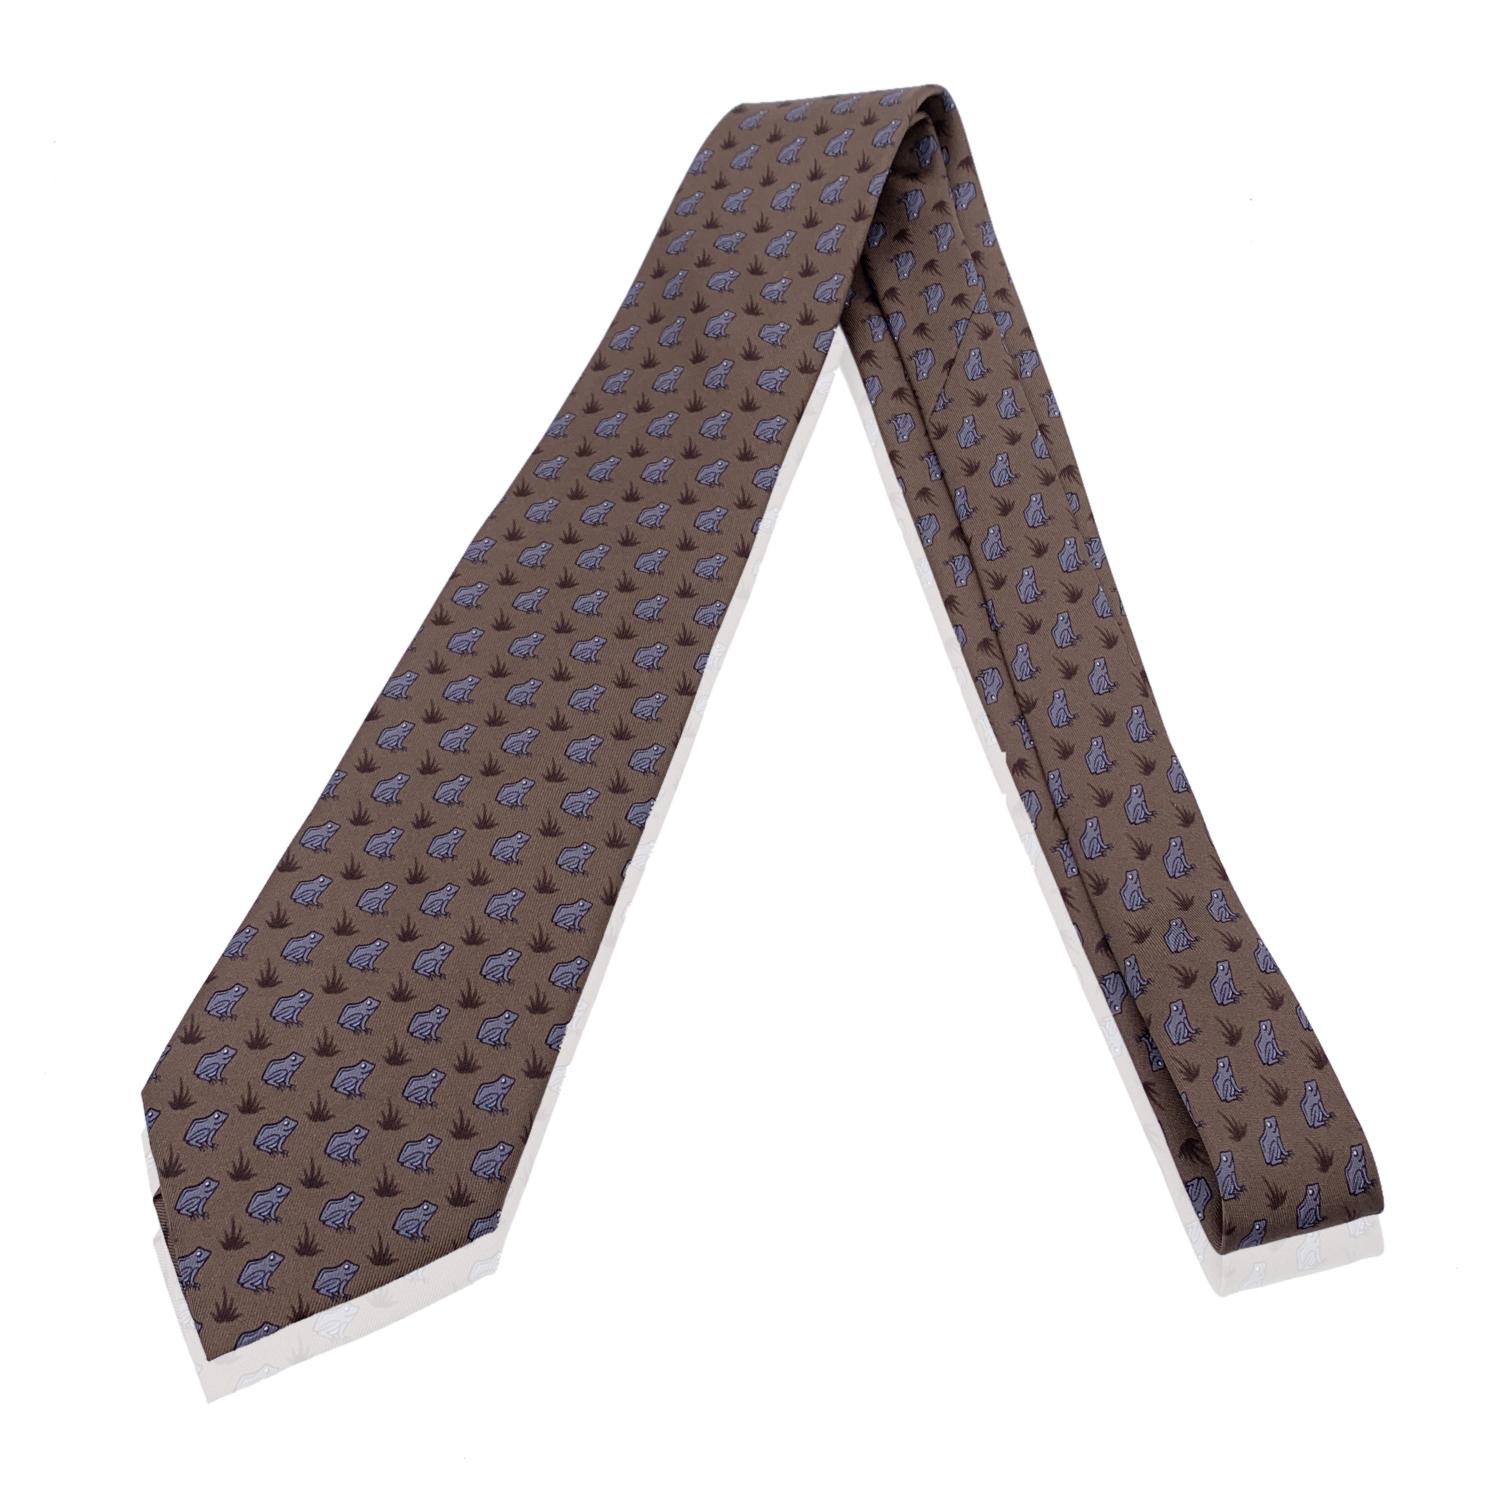 Elegant Hermes Neck Tie in brown color with frogs pattern. Mod. 7257 MA. Composition: 100% Silk Hermes composition tag attached. Made in France. Total length: 56.5 inches - 143,5 cm. Max width: 3.25 inches - 8.2 cm

Details

MATERIAL: Silk

COLOR: